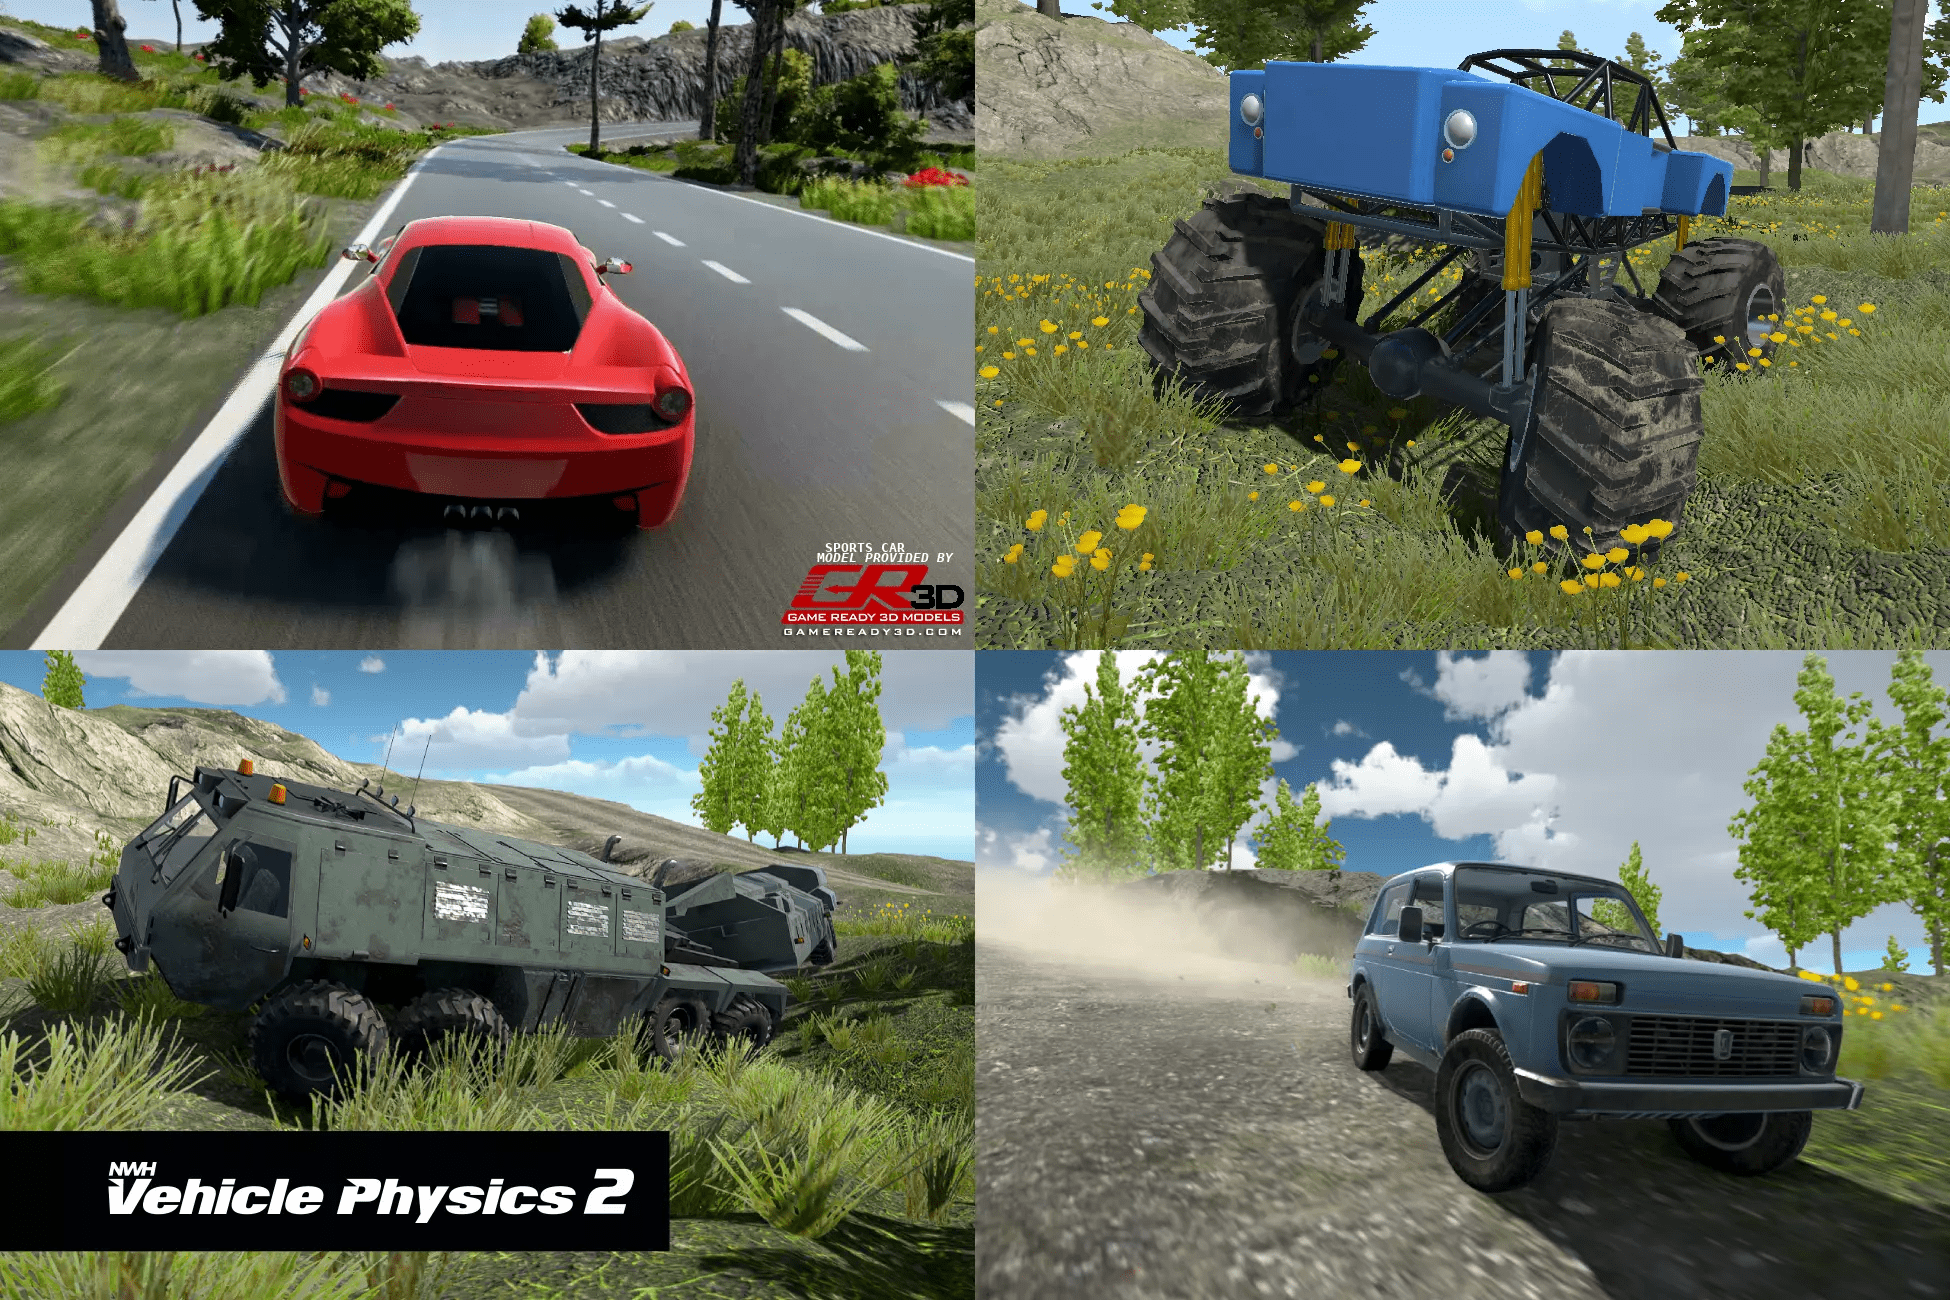 NWH Vehicle Physics 2 - Free Download